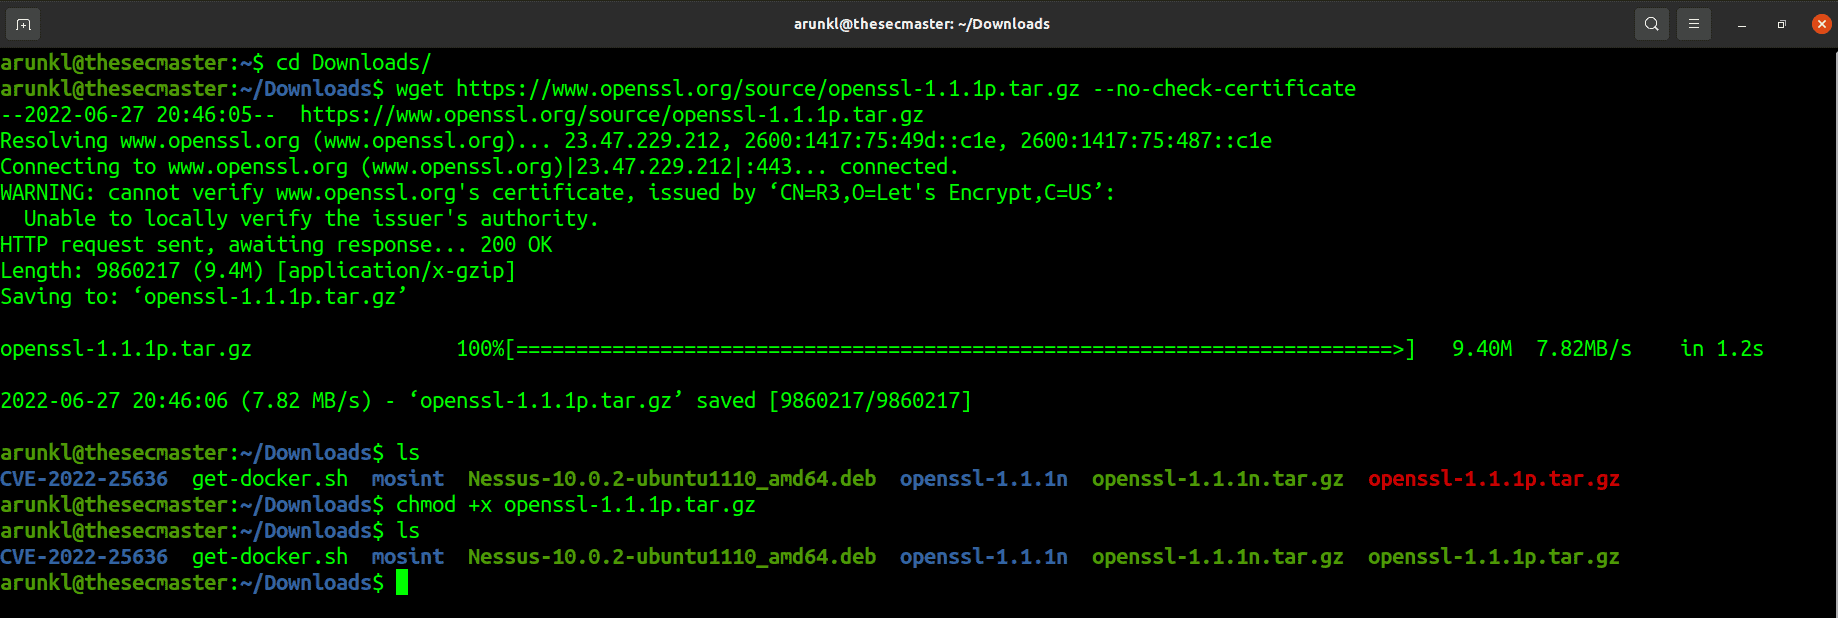 Download The Latest Openssl Package